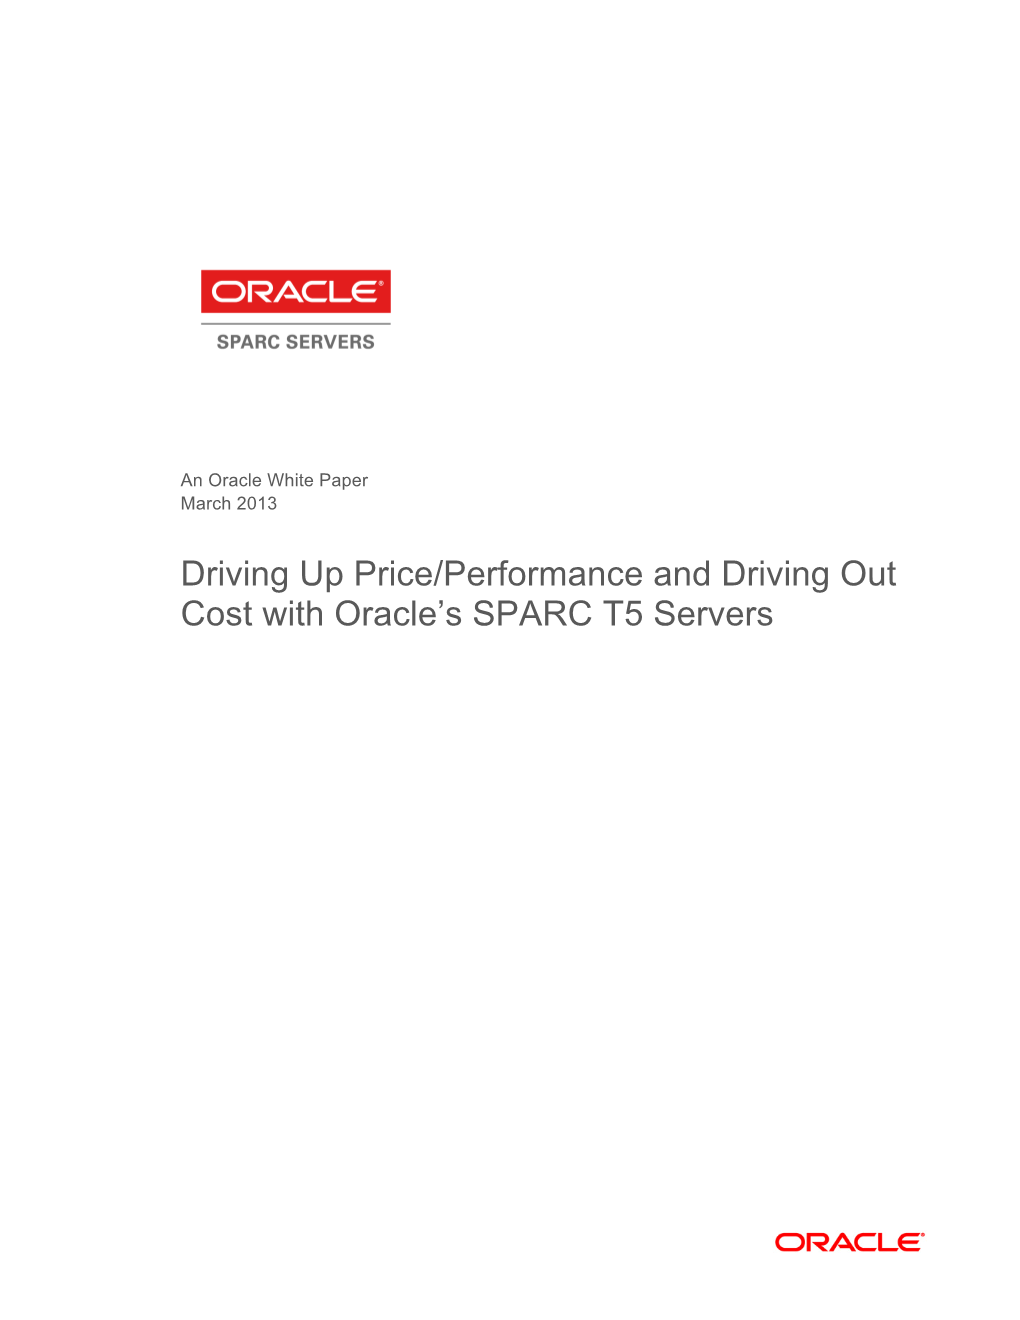 Driving up Price/Performance and Driving out Cost with Oracle's